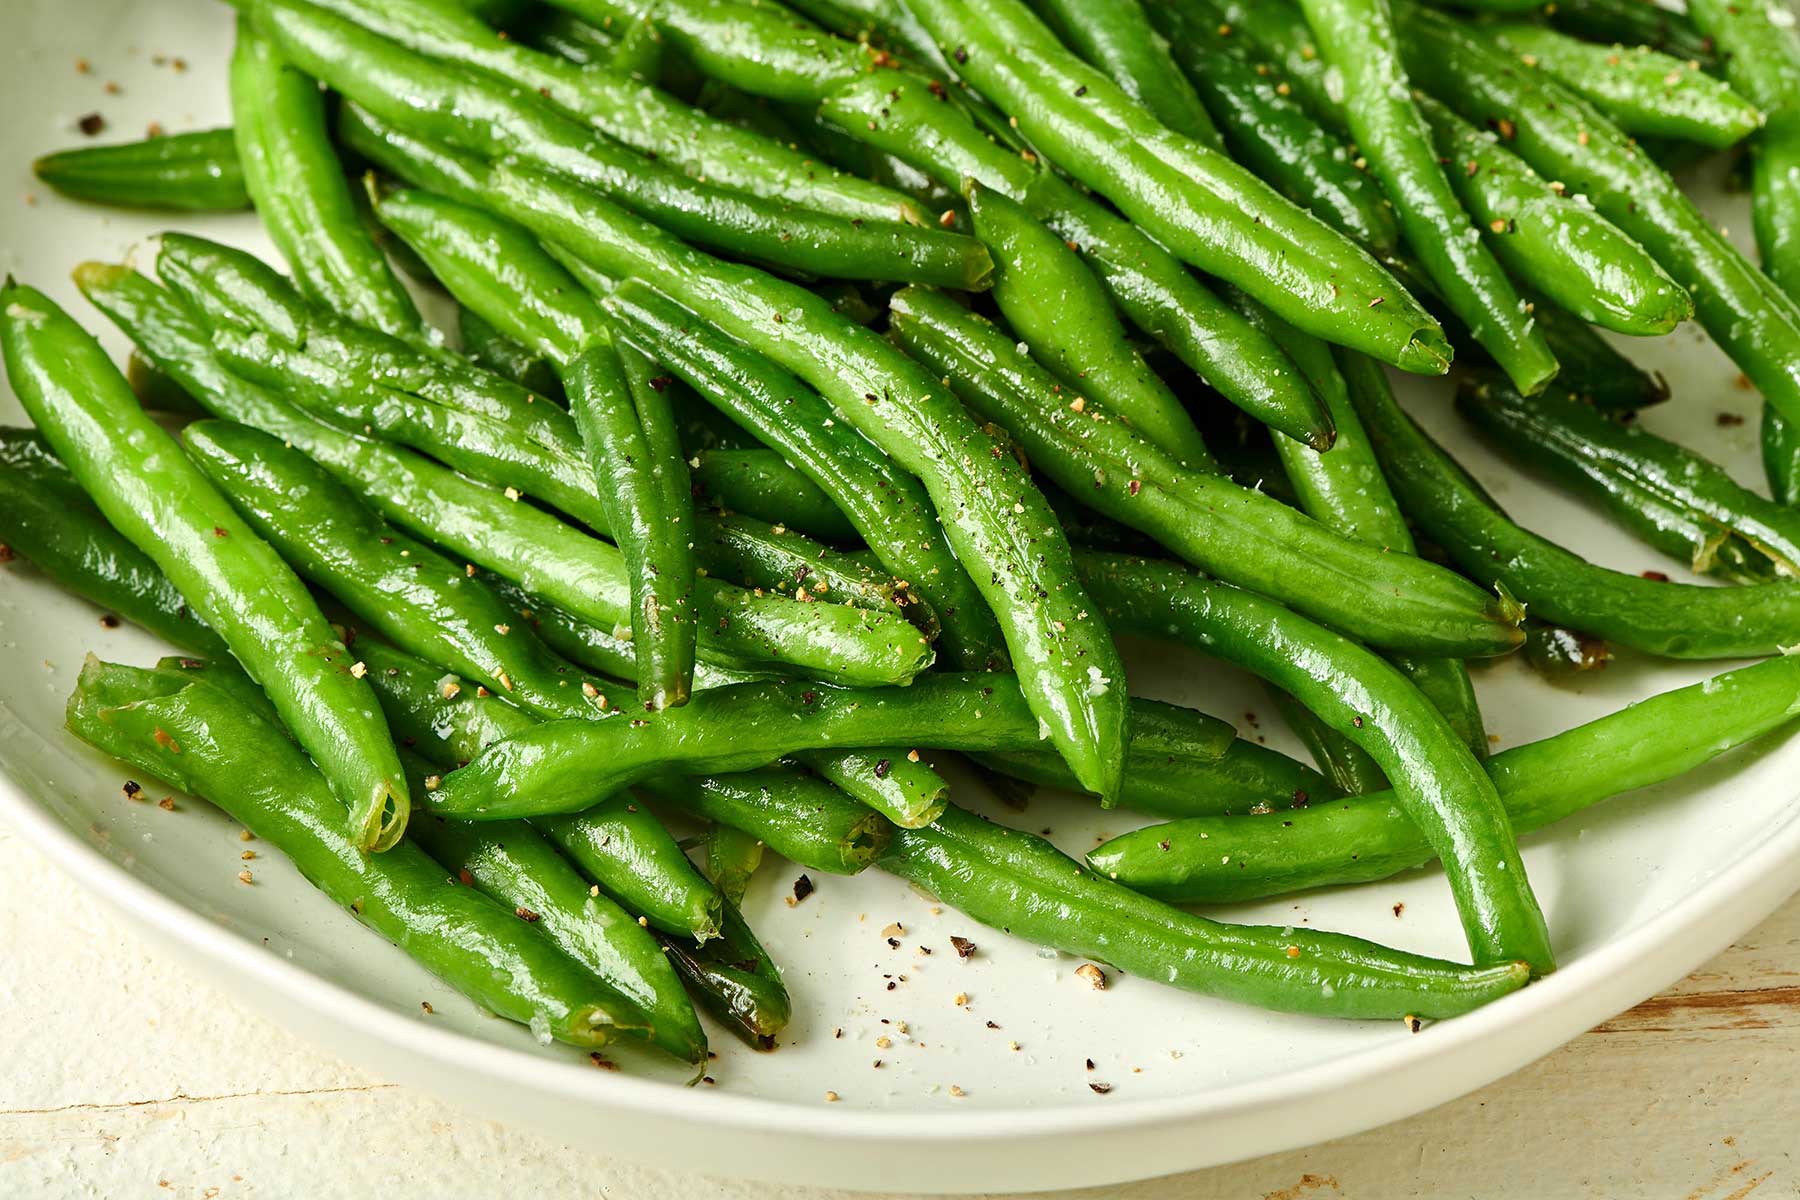 how-to-season-green-beans-cooked-in-microwave-in-a-bag